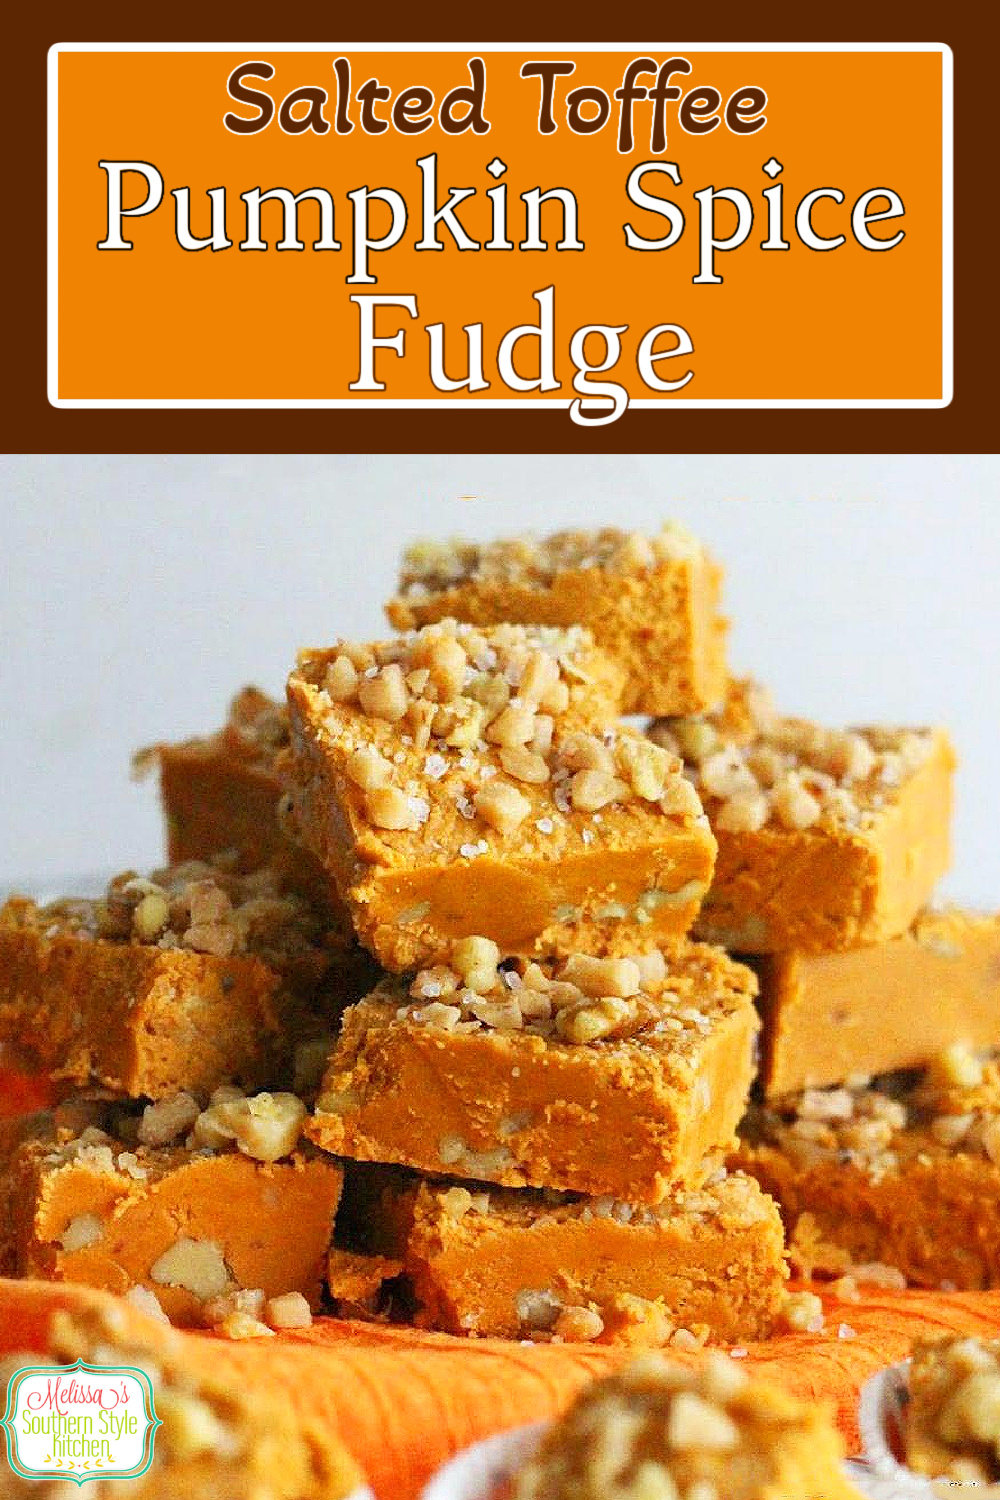 This Salted Toffee Pumpkin Spice Fudge is a seasonal delicacy topped with toffee bits for crunch sea salt to balance the sweet #pumpkinfudge #pumpkinspicefudge #fudgerecipes #pumpkinspice ##falldesserts #sweets #candy #thanksgivingdesserts #southernfood #southernrecipes via @melissasssk